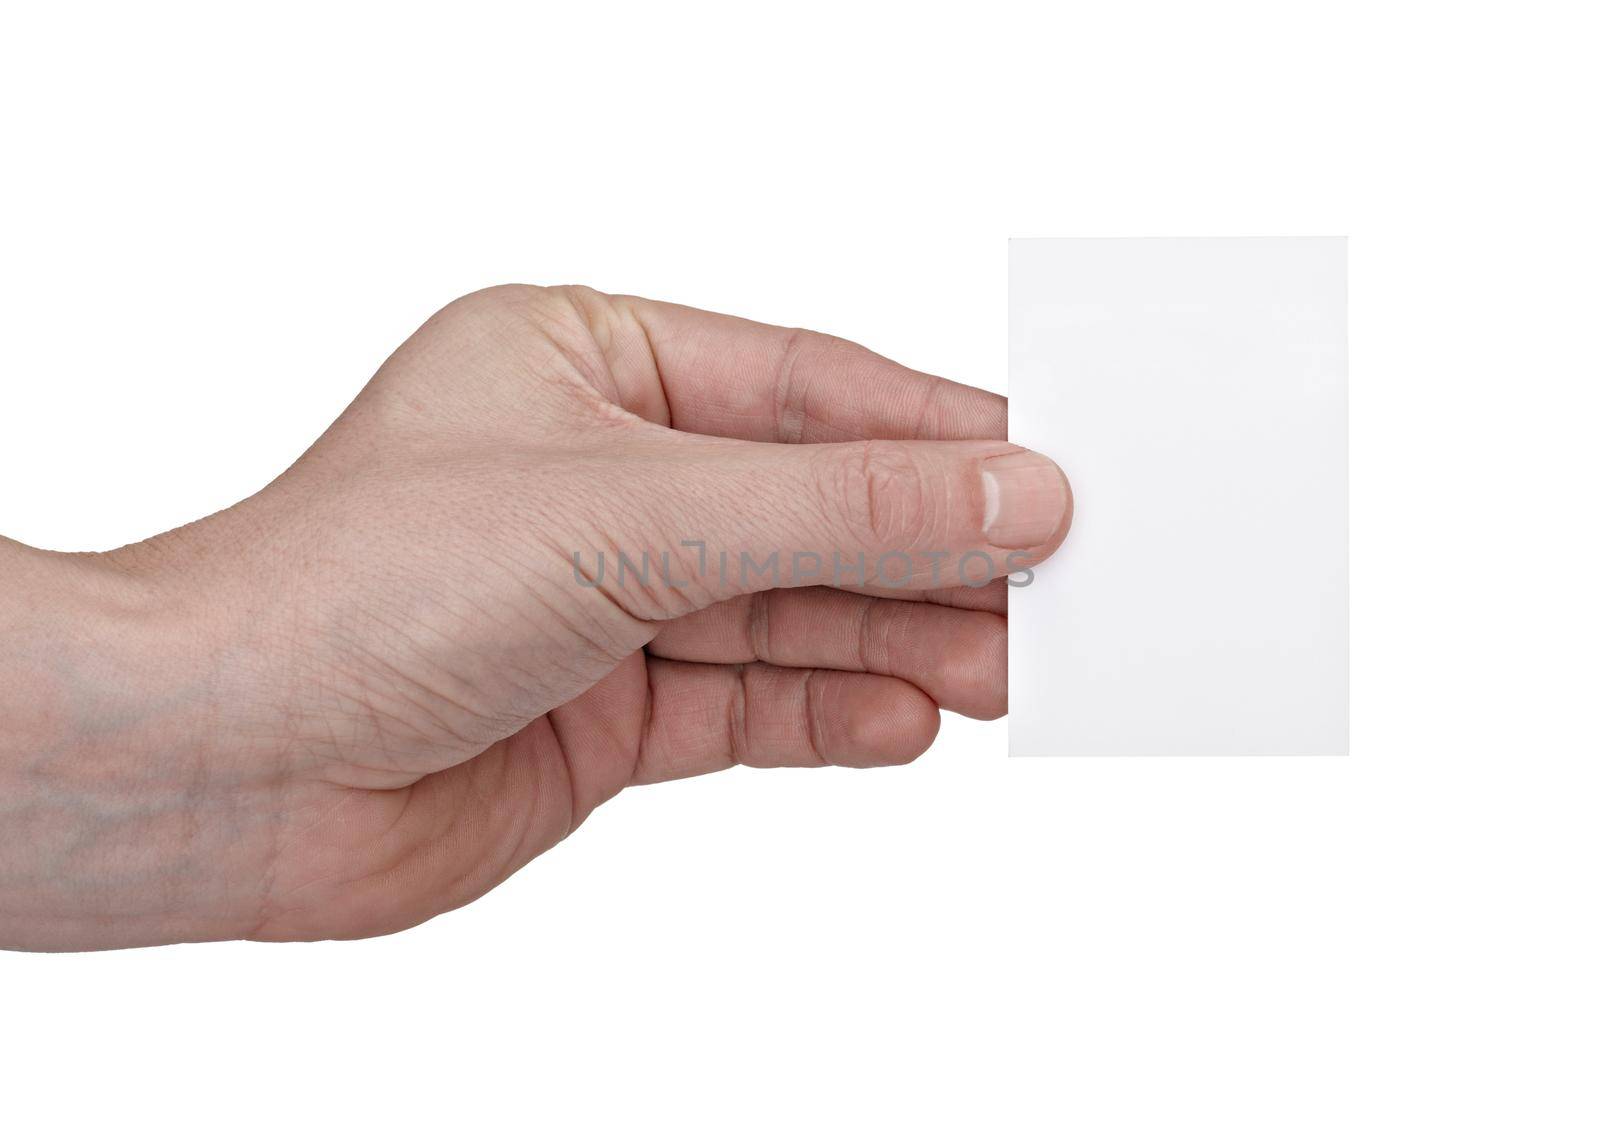 blank sign note label hand holding paper by Picsfive